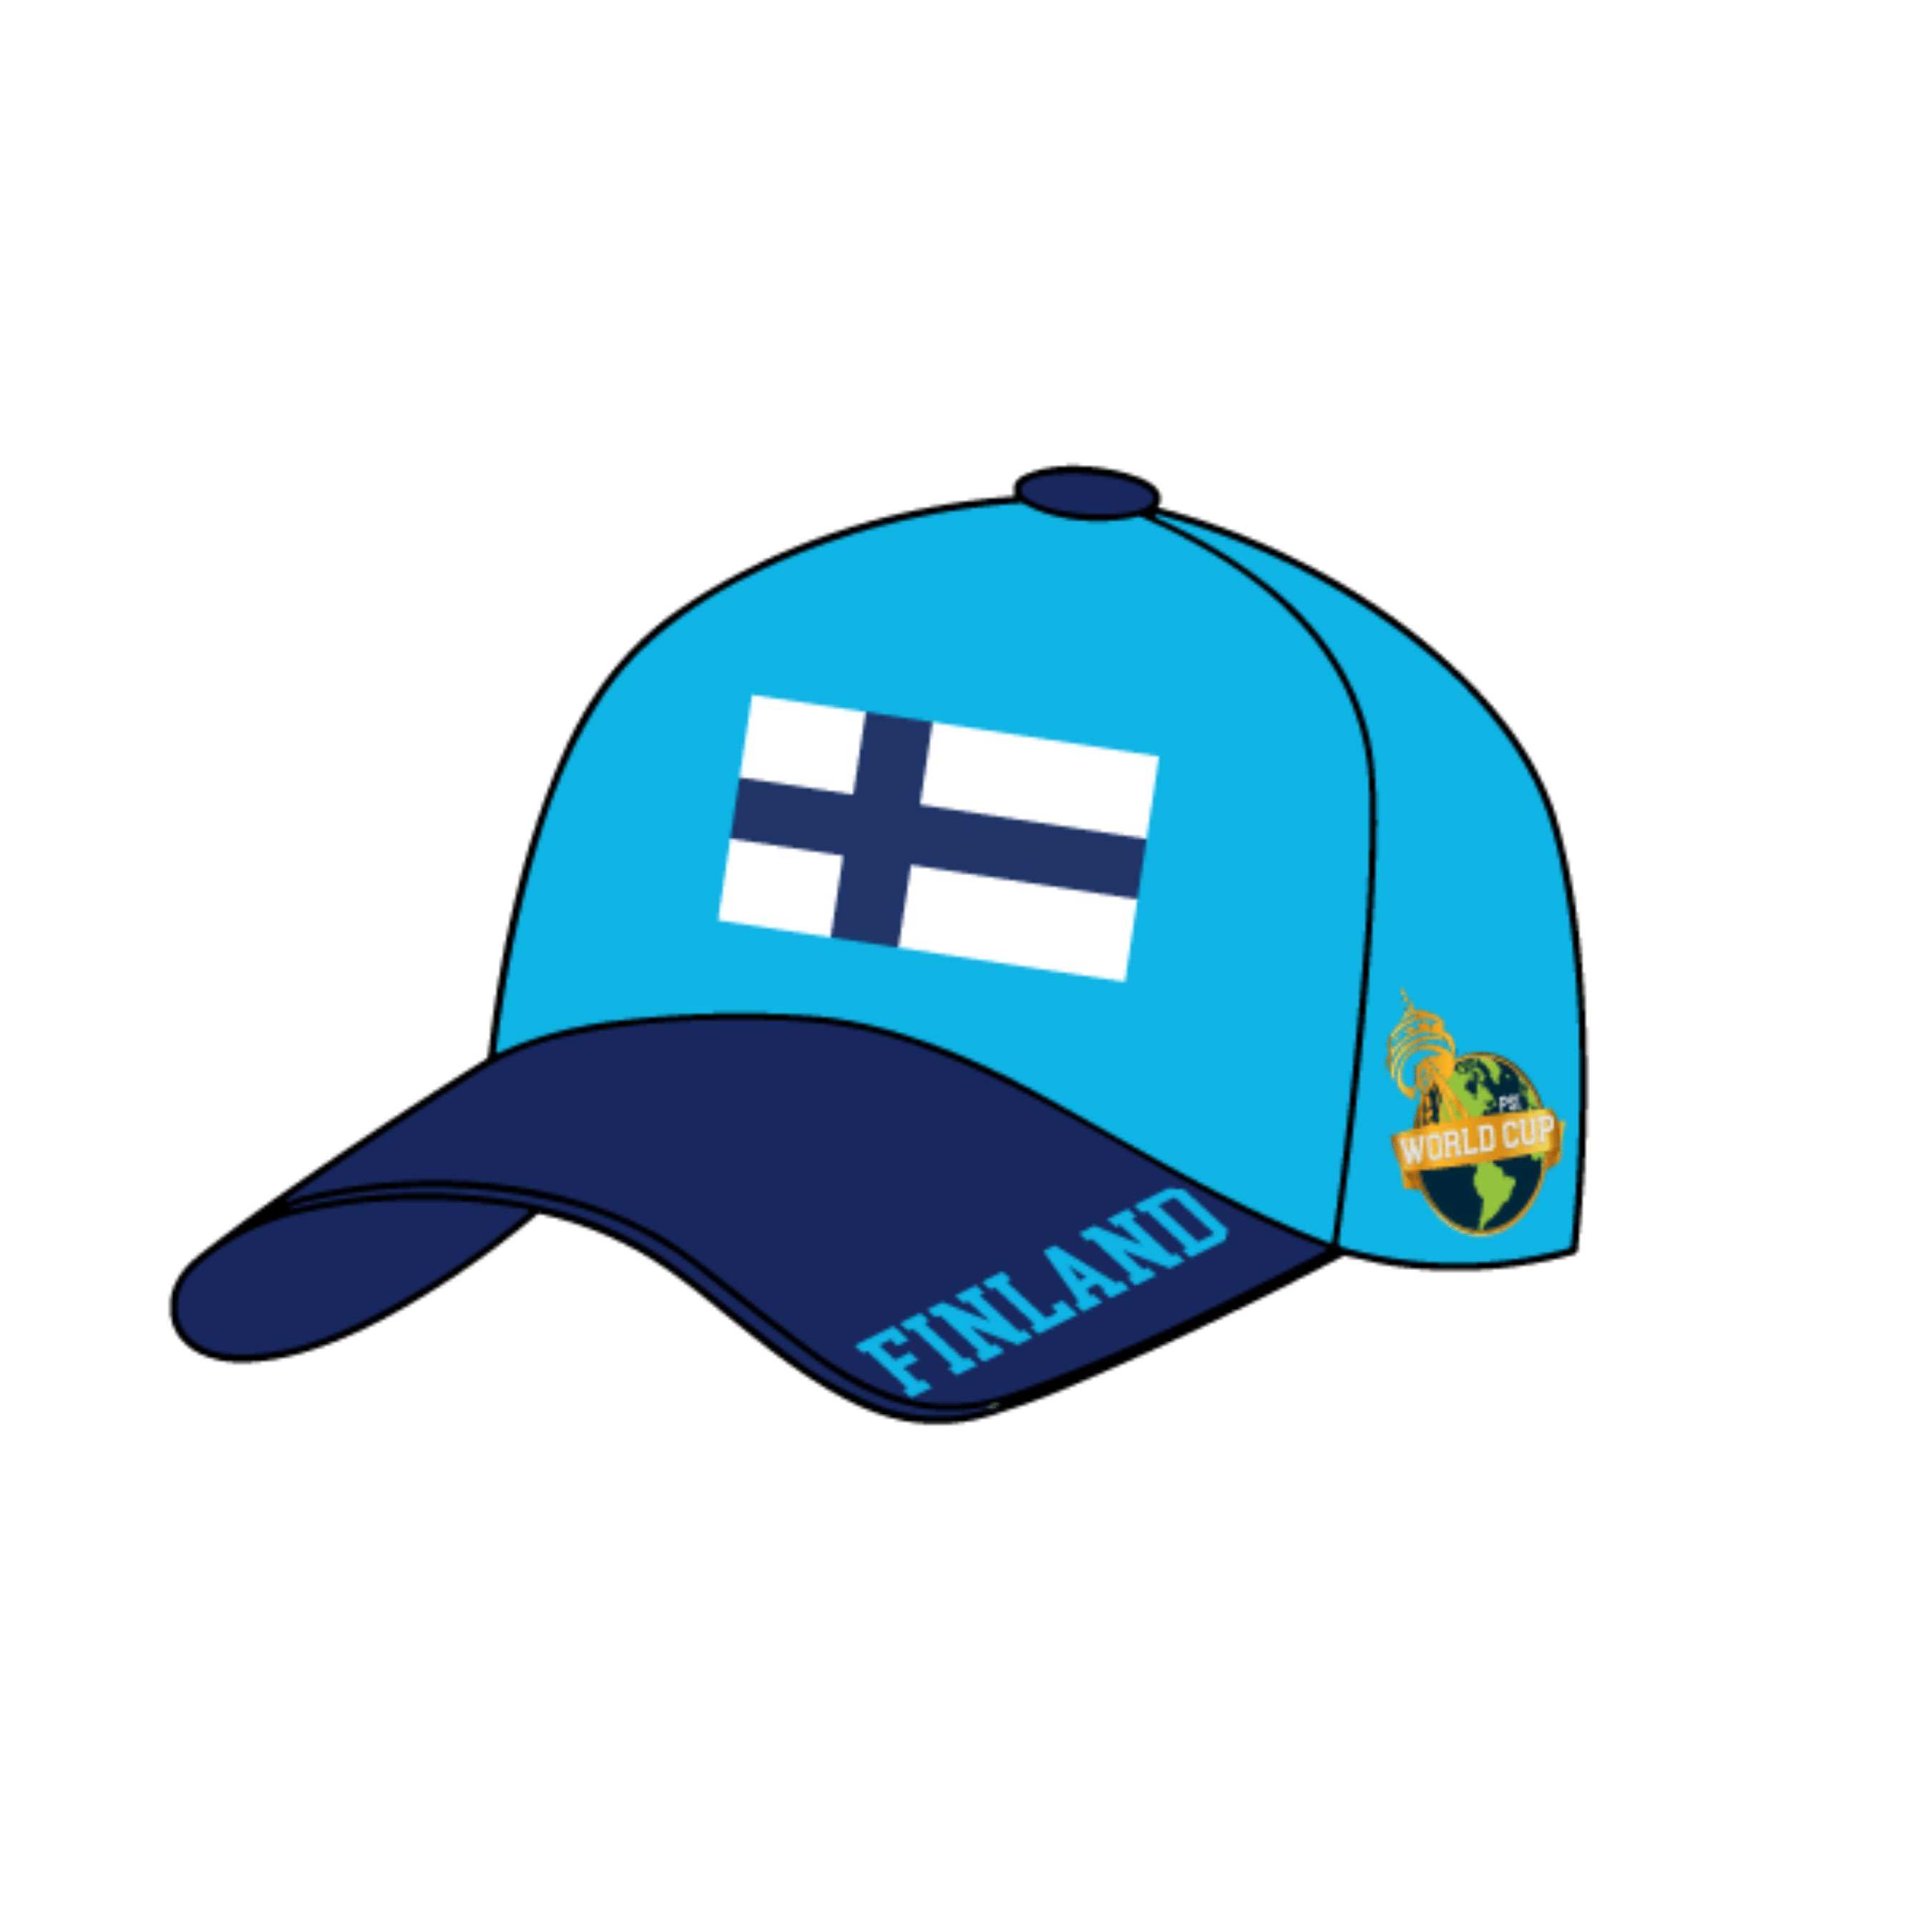 Finland World Cup Hat